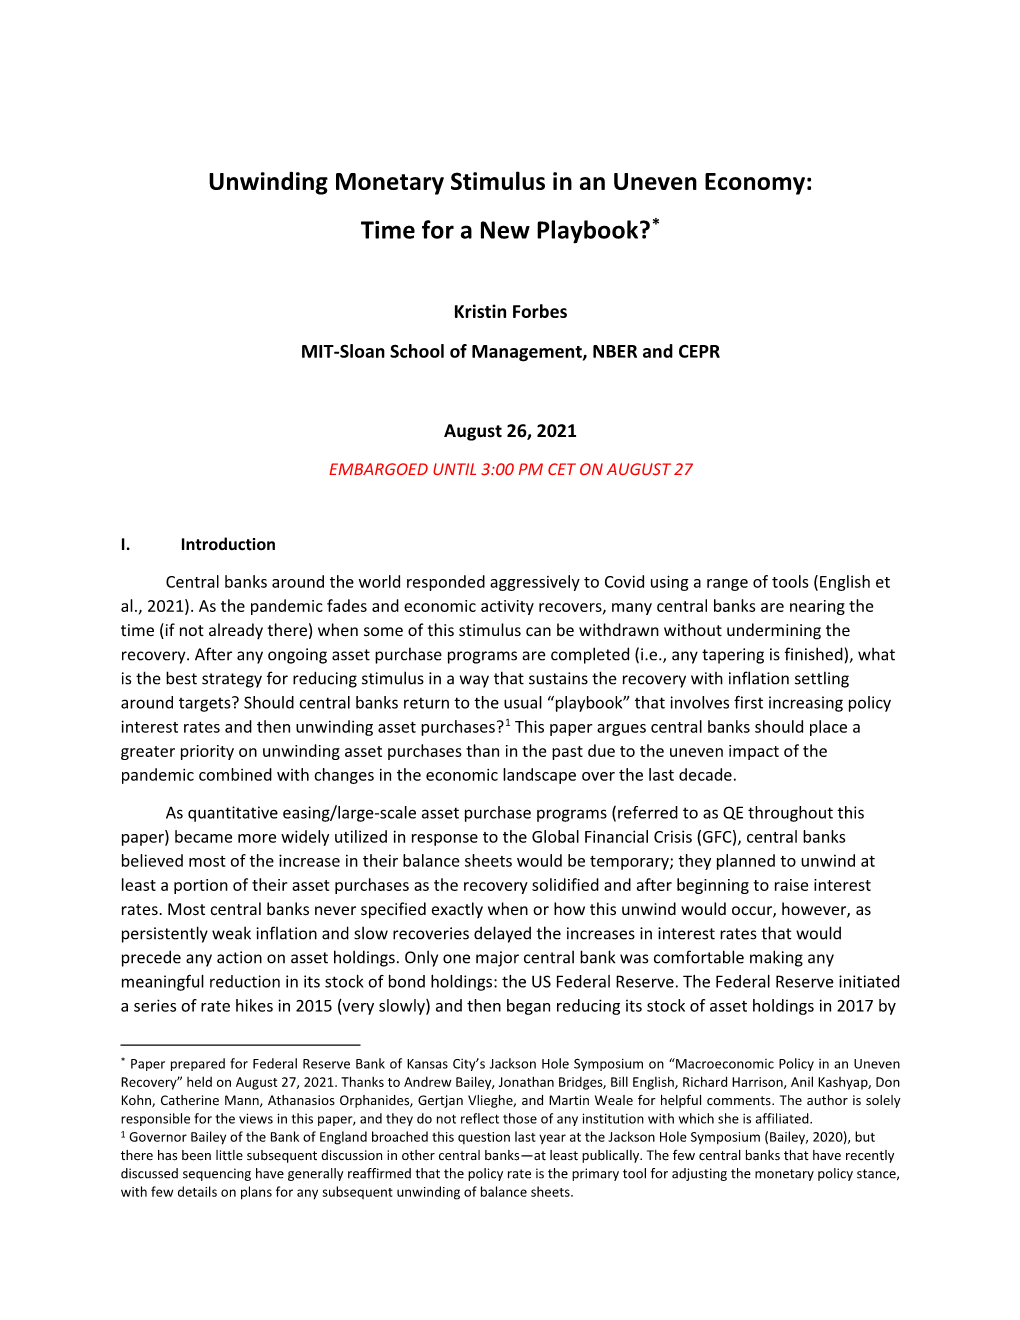 Unwinding Monetary Stimulus in an Uneven Economy: Time for a New